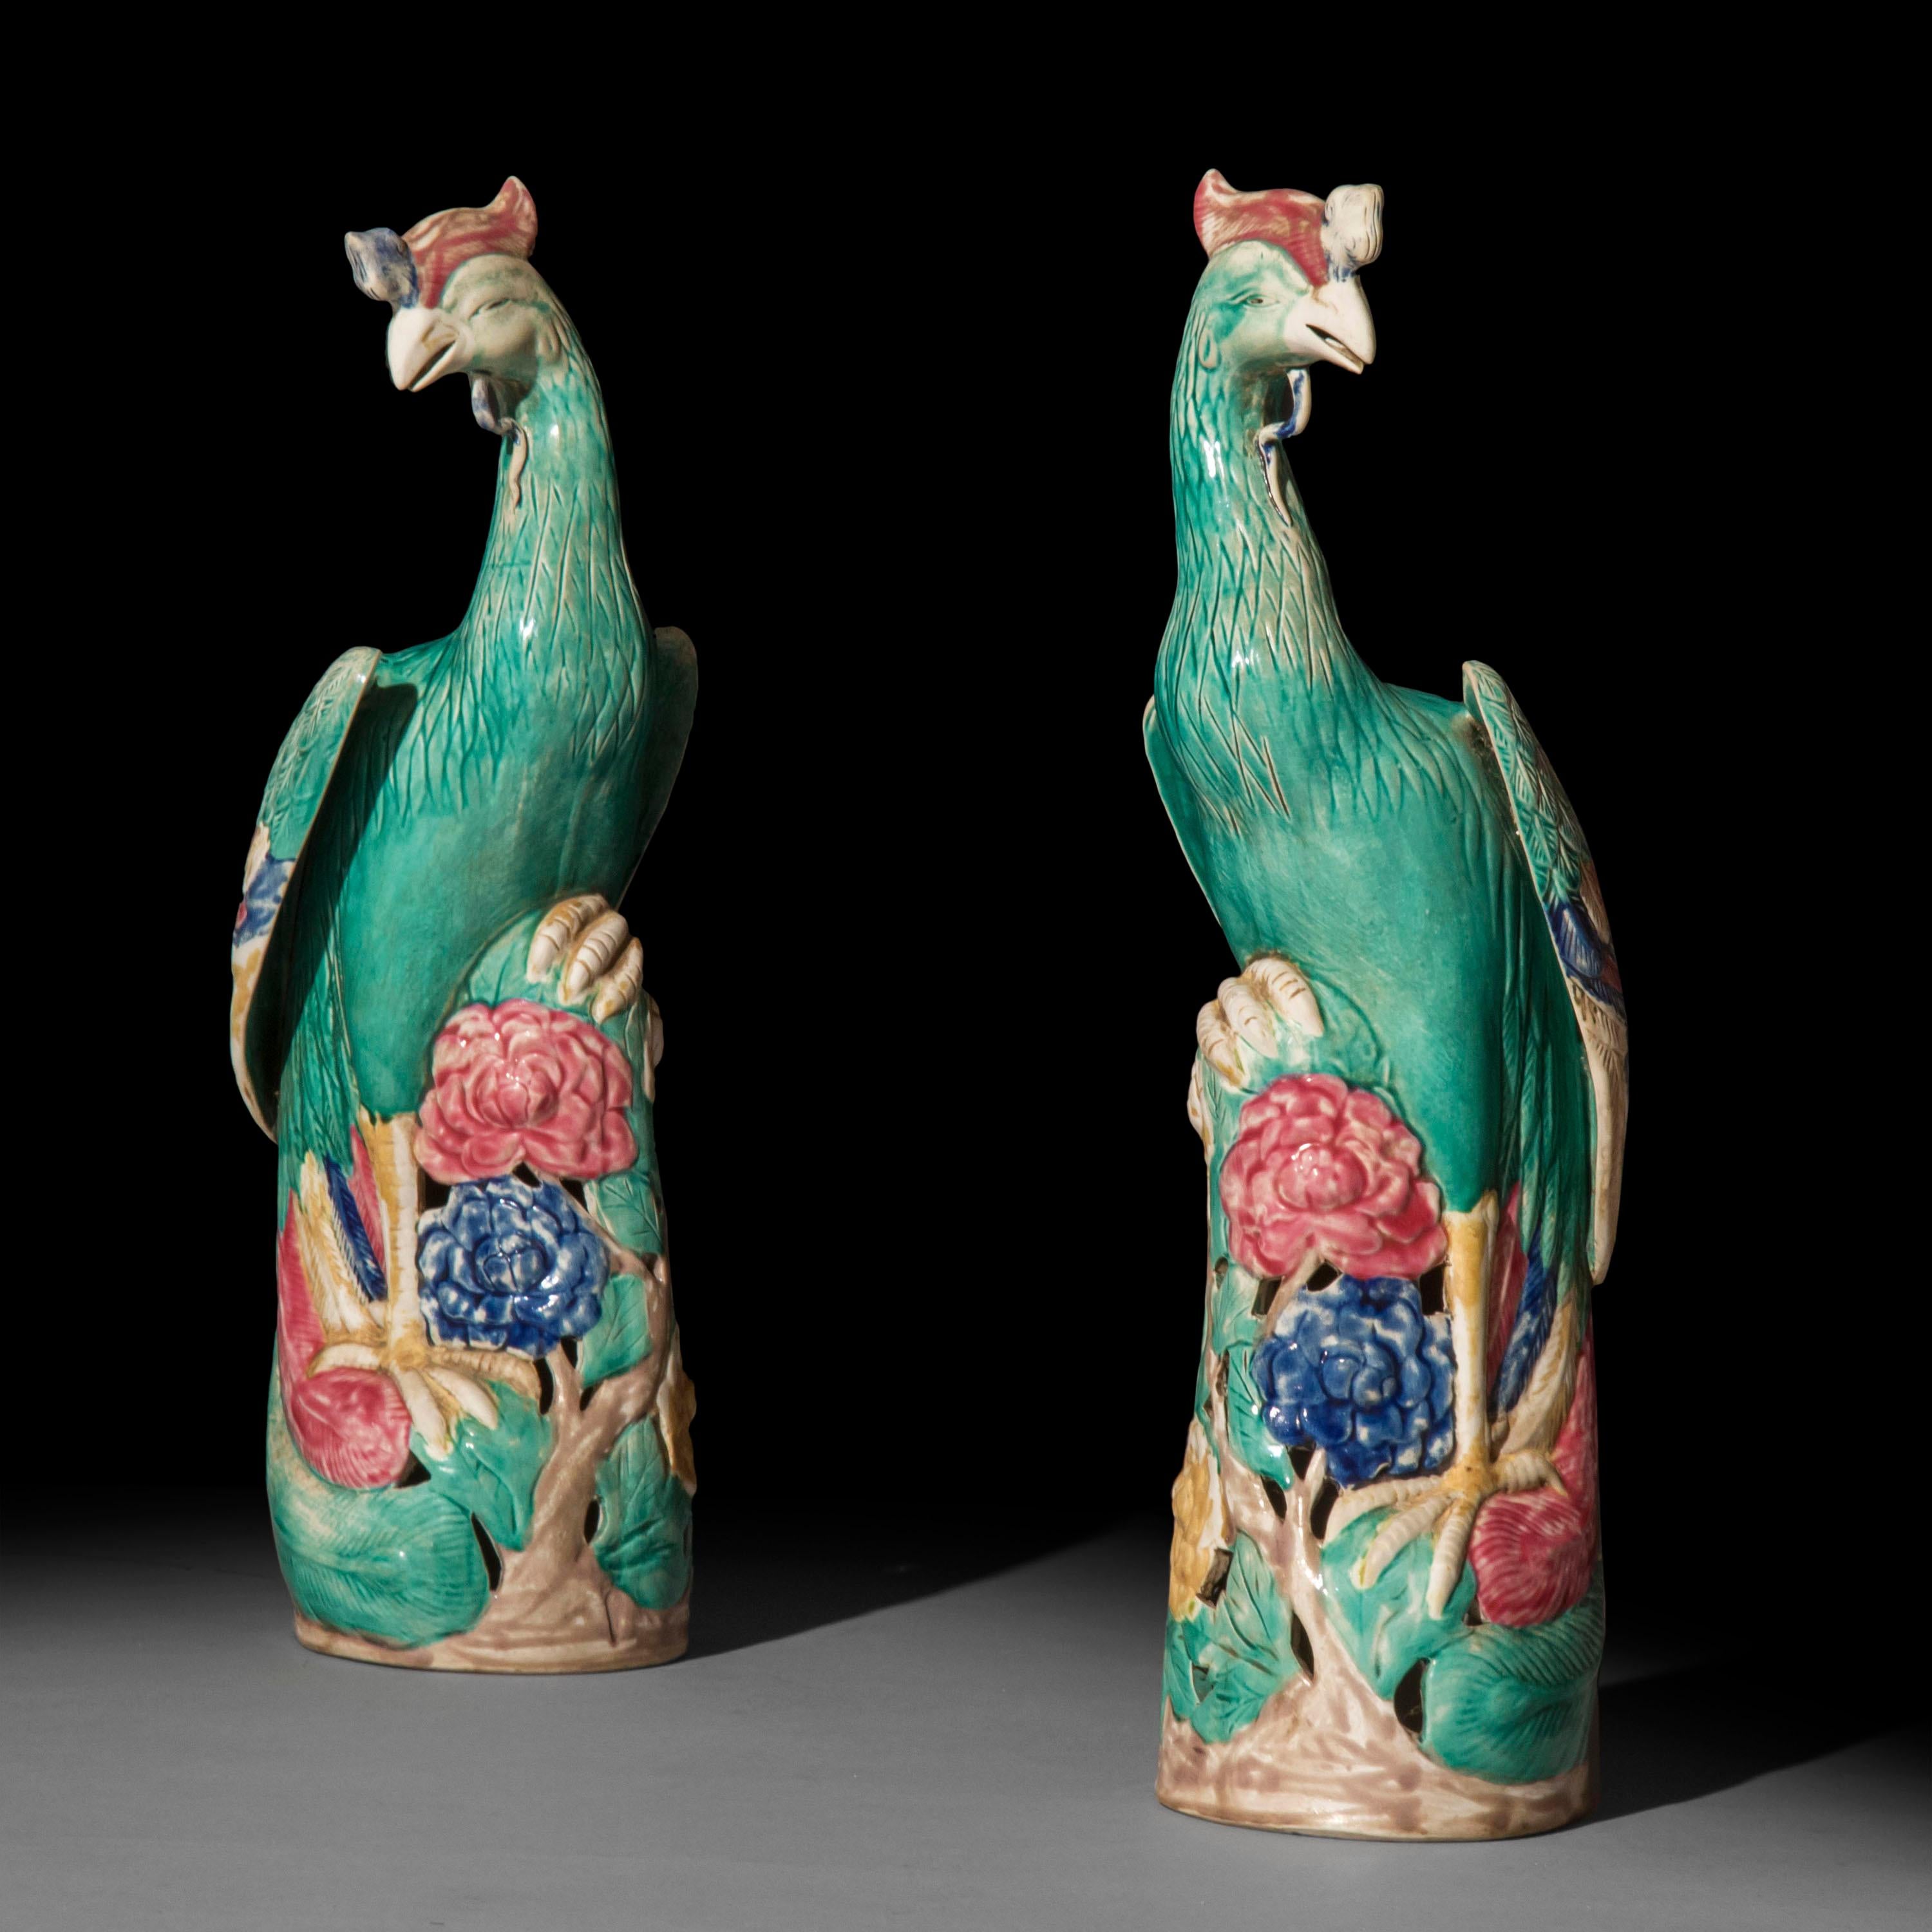 A charming pair of Chinese Export phoenix porcelain figurines, polychrome decorated.

China, 20th century.

Size: Height 41 cm / 16 inches.
 